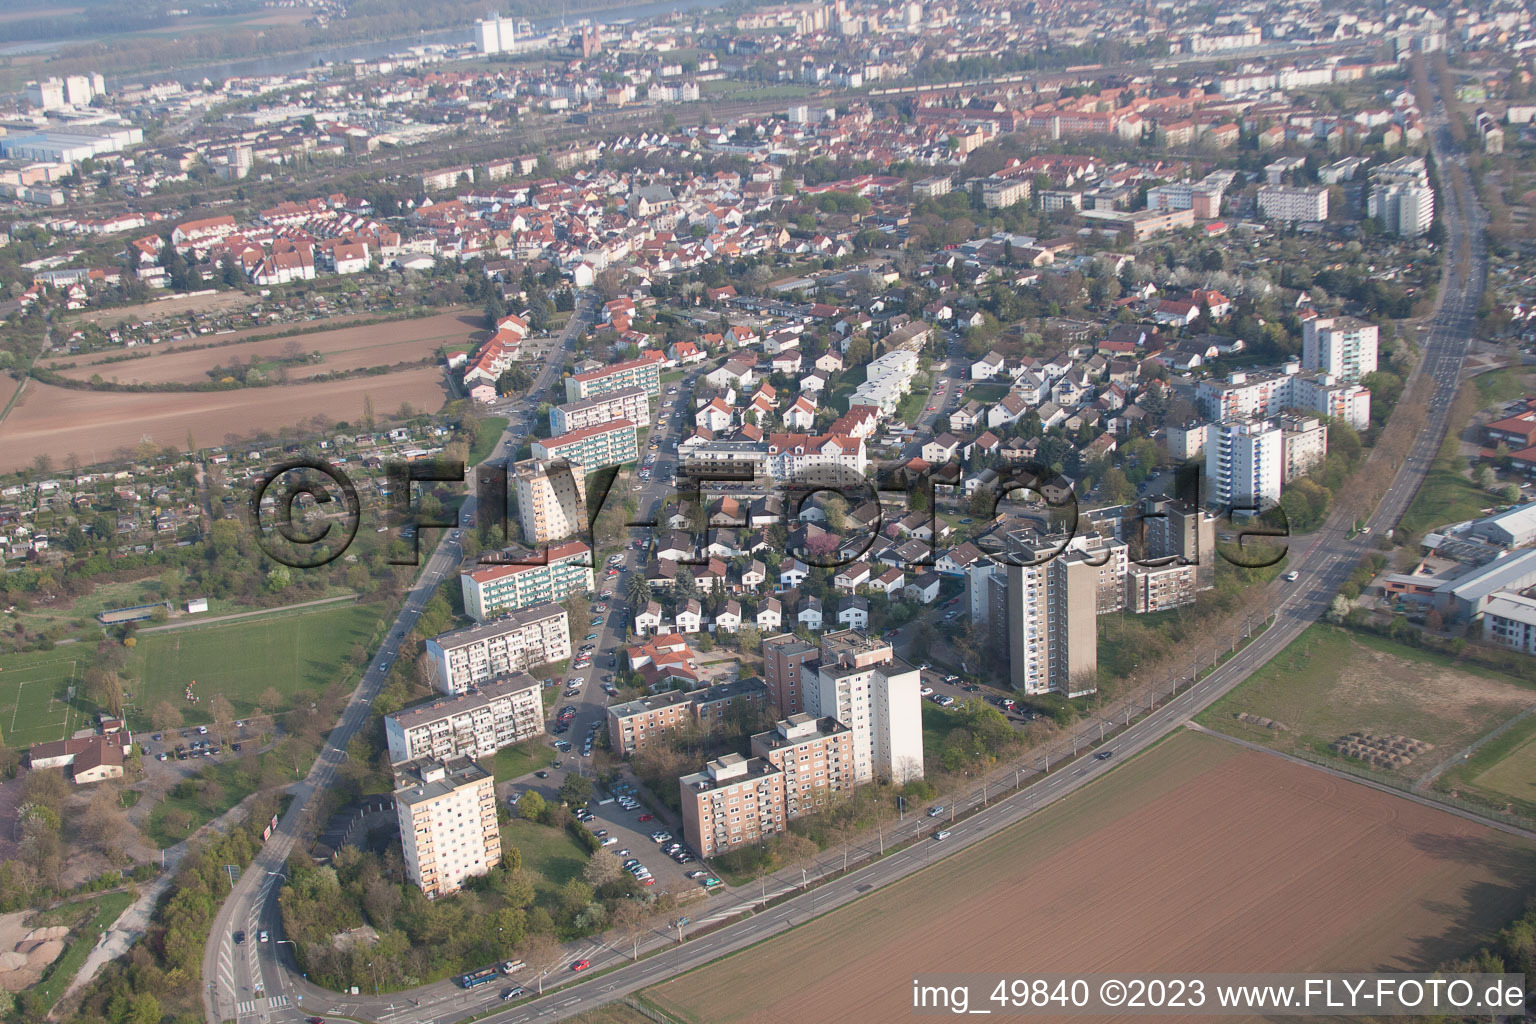 Oblique view of District Neuhausen in Worms in the state Rhineland-Palatinate, Germany